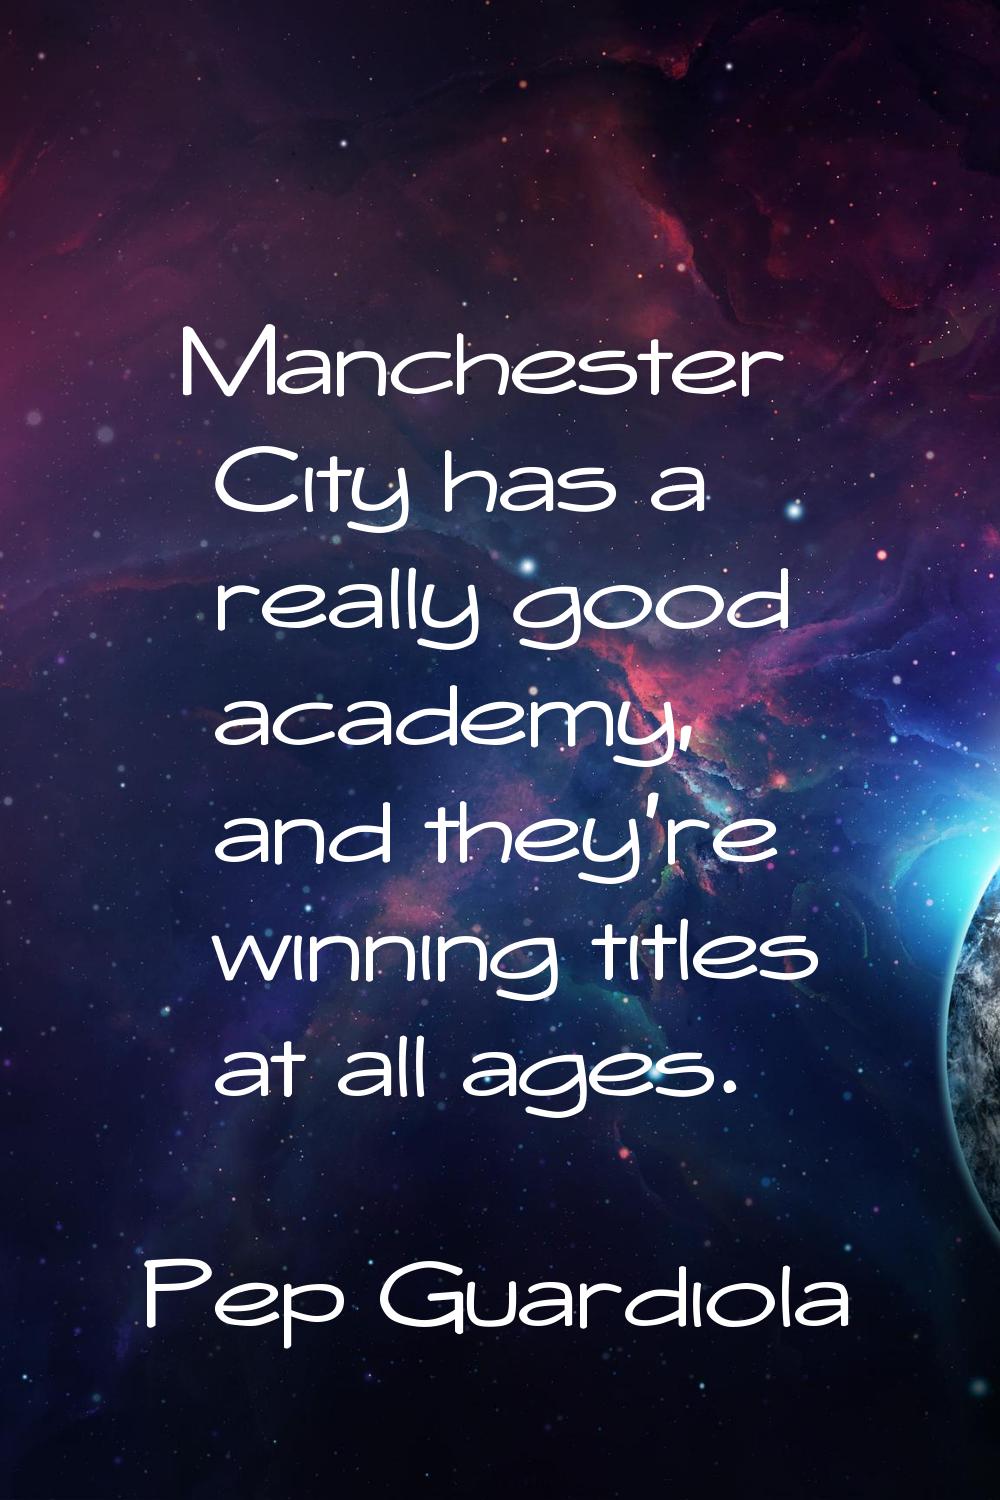 Manchester City has a really good academy, and they're winning titles at all ages.